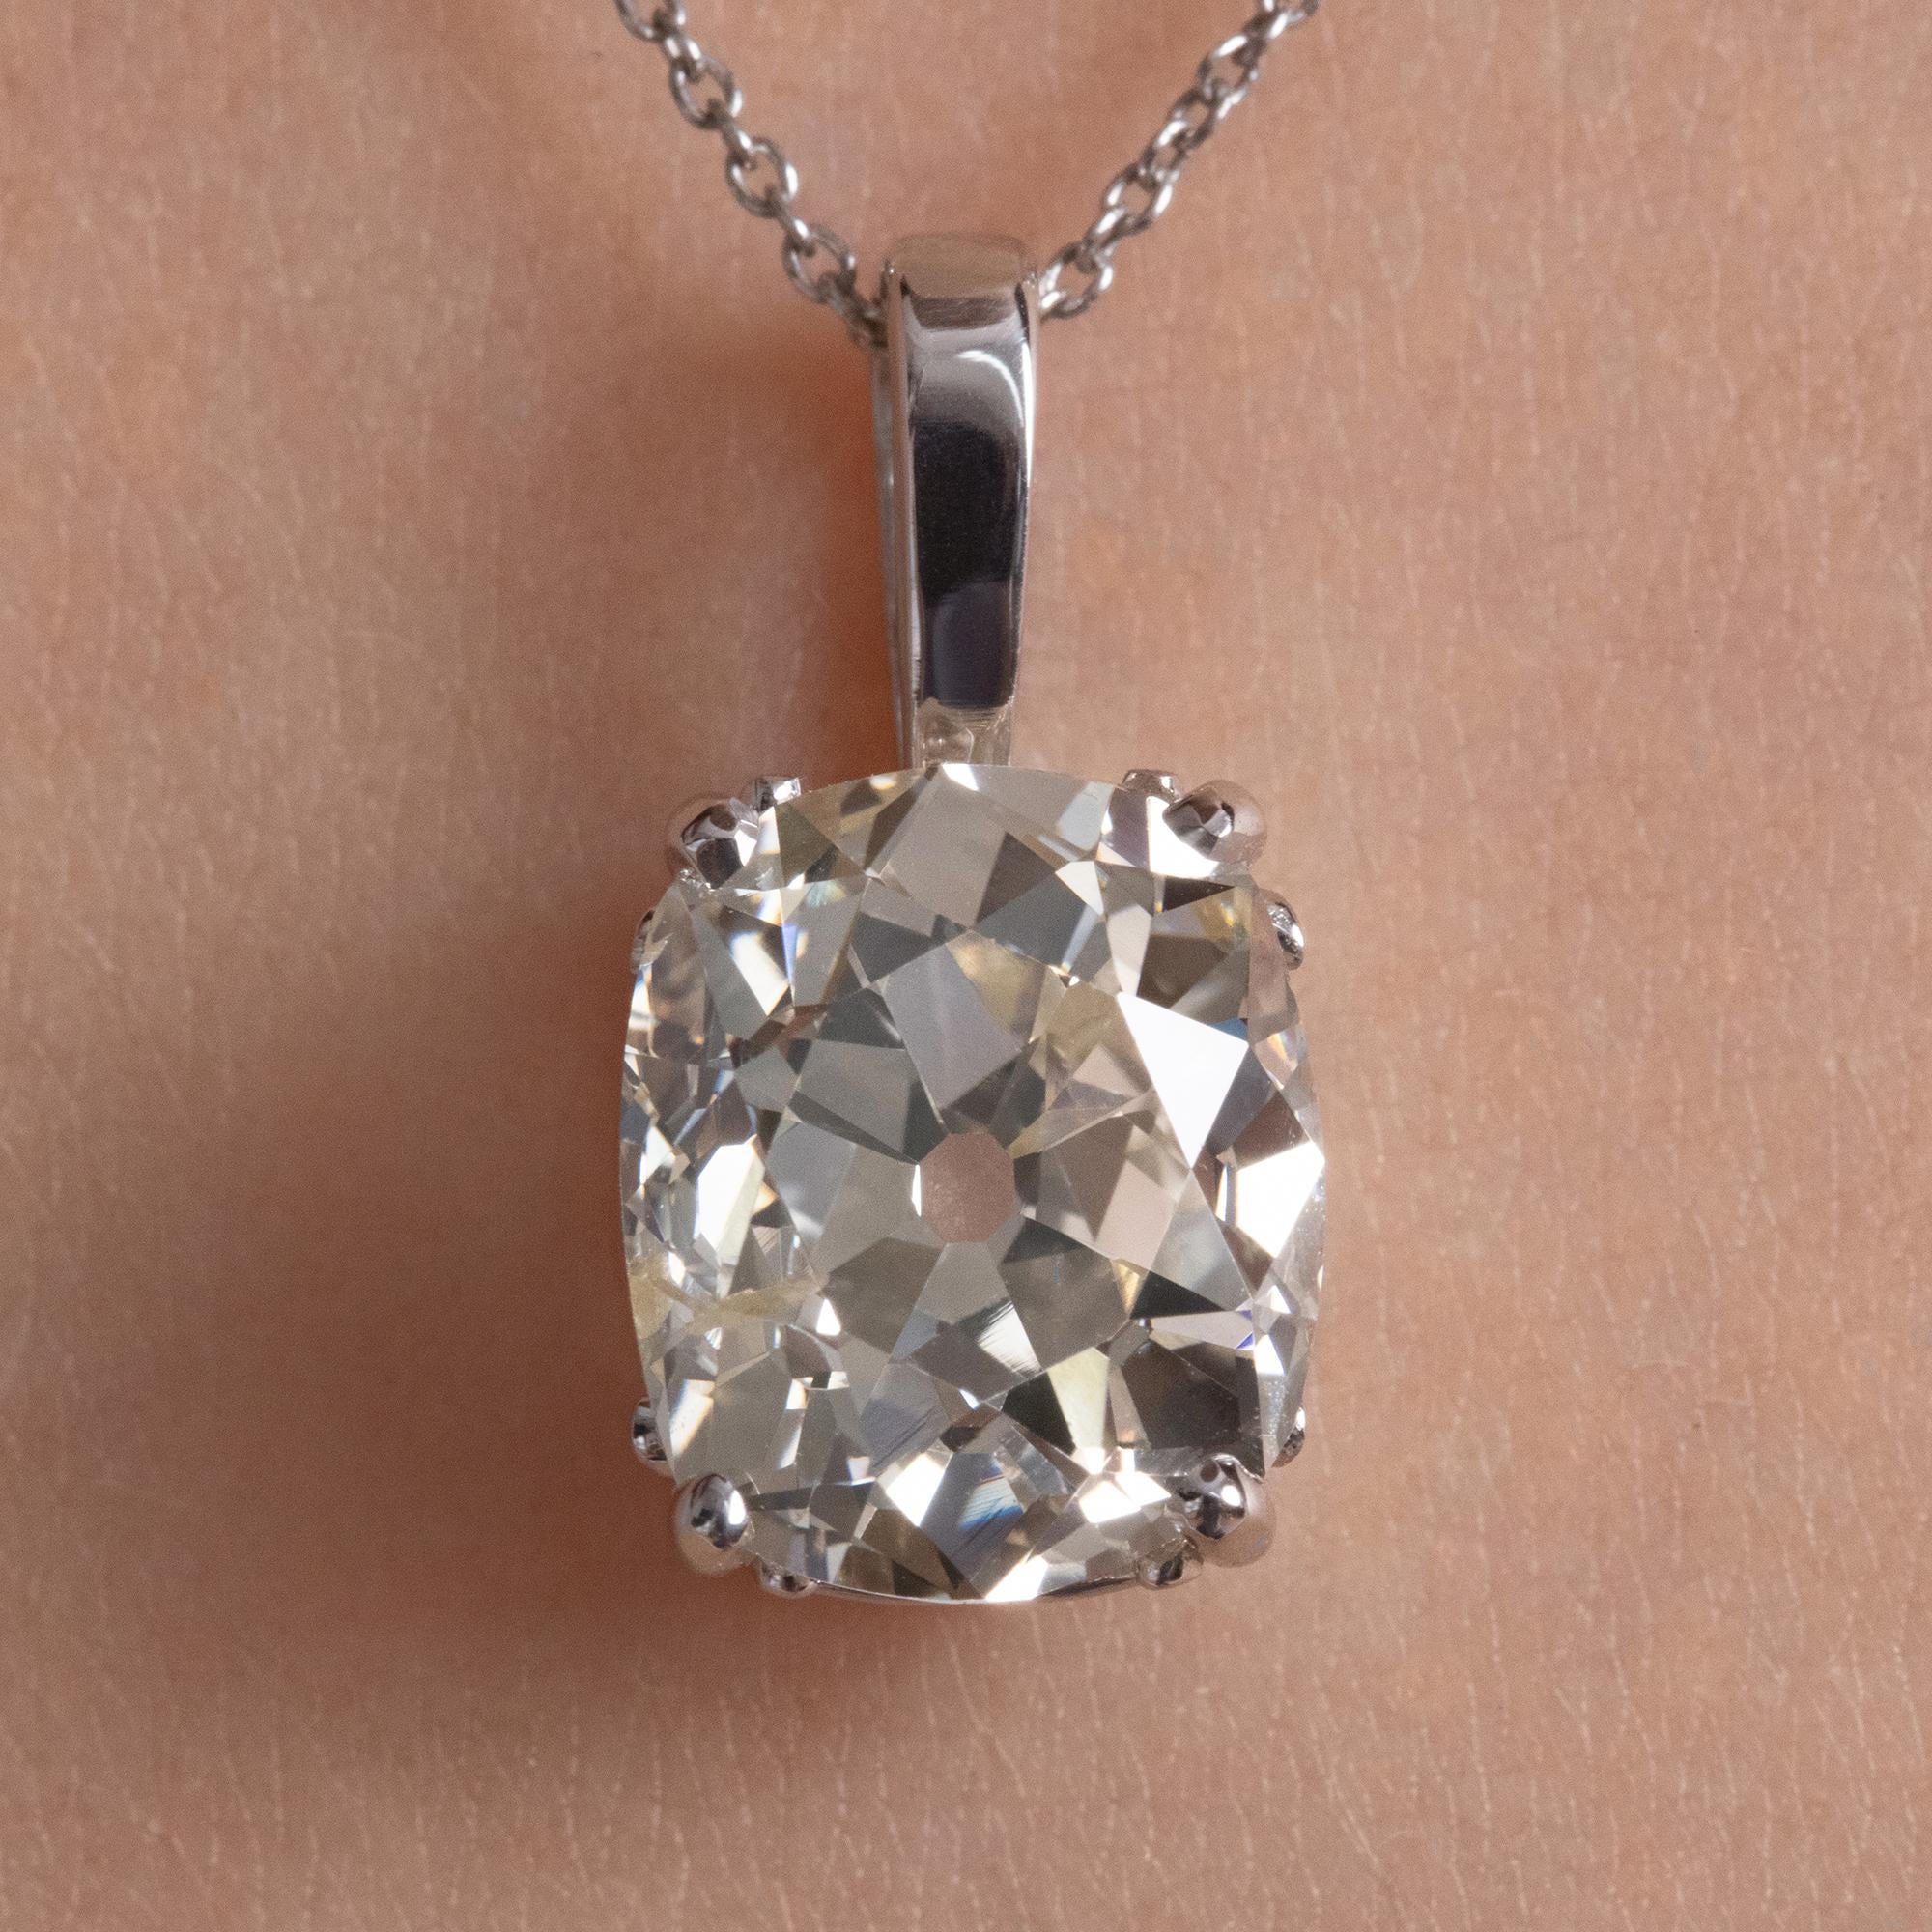 A wonderful Antique Diamond Pendant in 14k White Gold (stamped). GIA Certified 3.32ct Old Mine Cushion Diamond in N color, I1 clarity; with measurements of 9.65x8.10x5.63mm- HUGE! GIA report # 2205859863. 
This Wonderful and Different Diamond